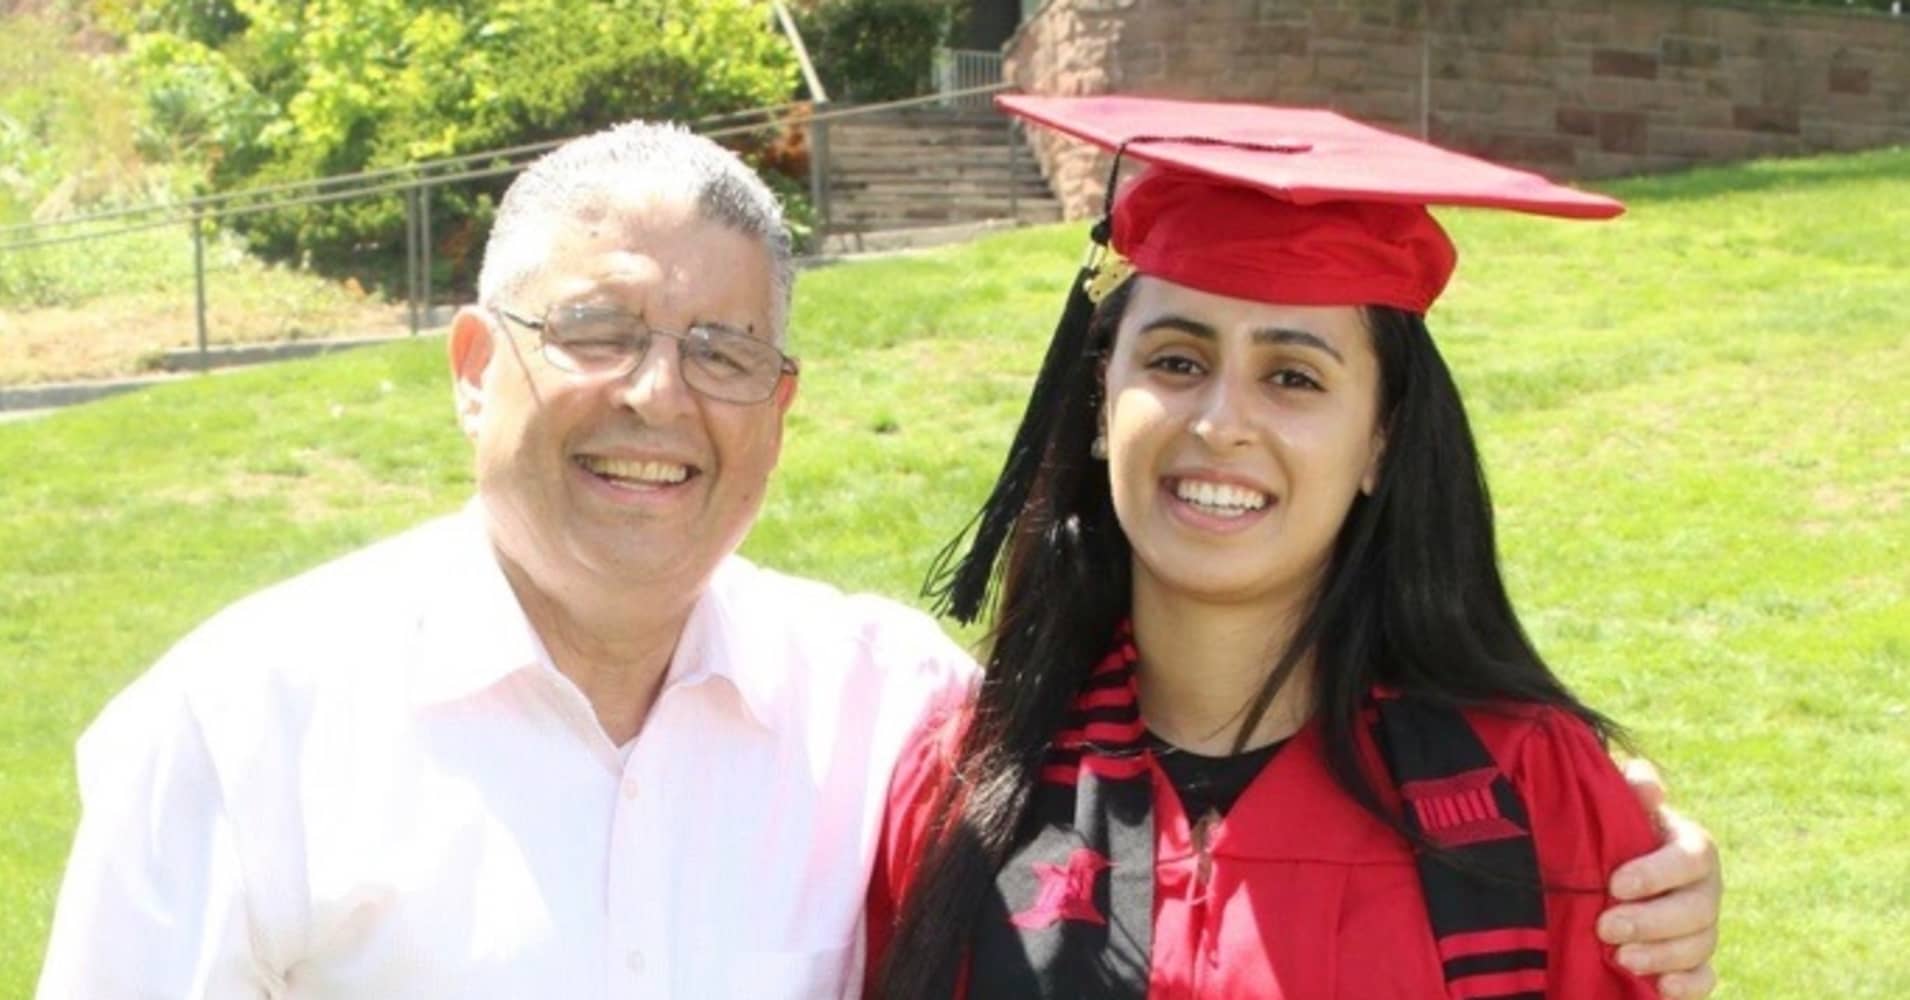 Me and my dad at my college graduation.